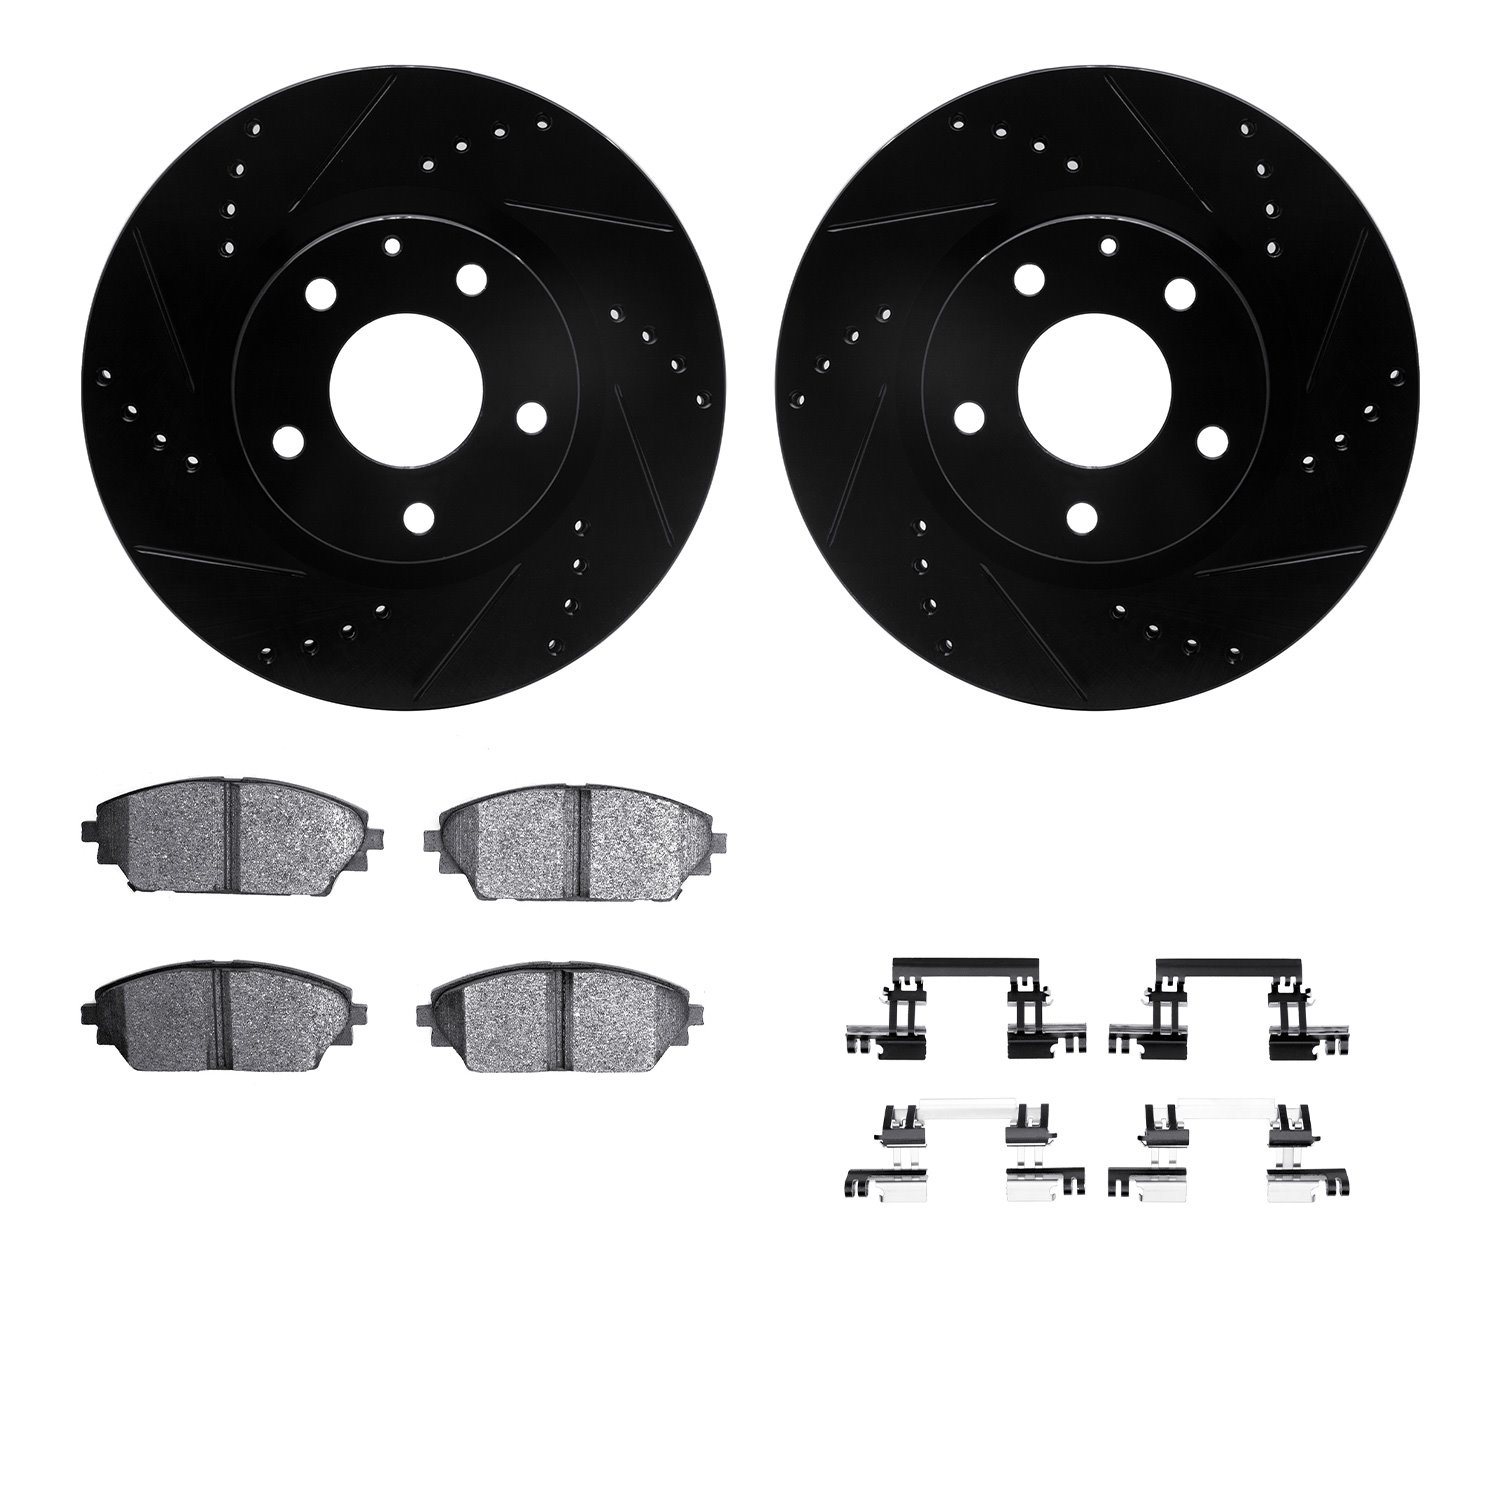 8312-80080 Drilled/Slotted Brake Rotors with 3000-Series Ceramic Brake Pads Kit & Hardware [Black], Fits Select Ford/Lincoln/Mer